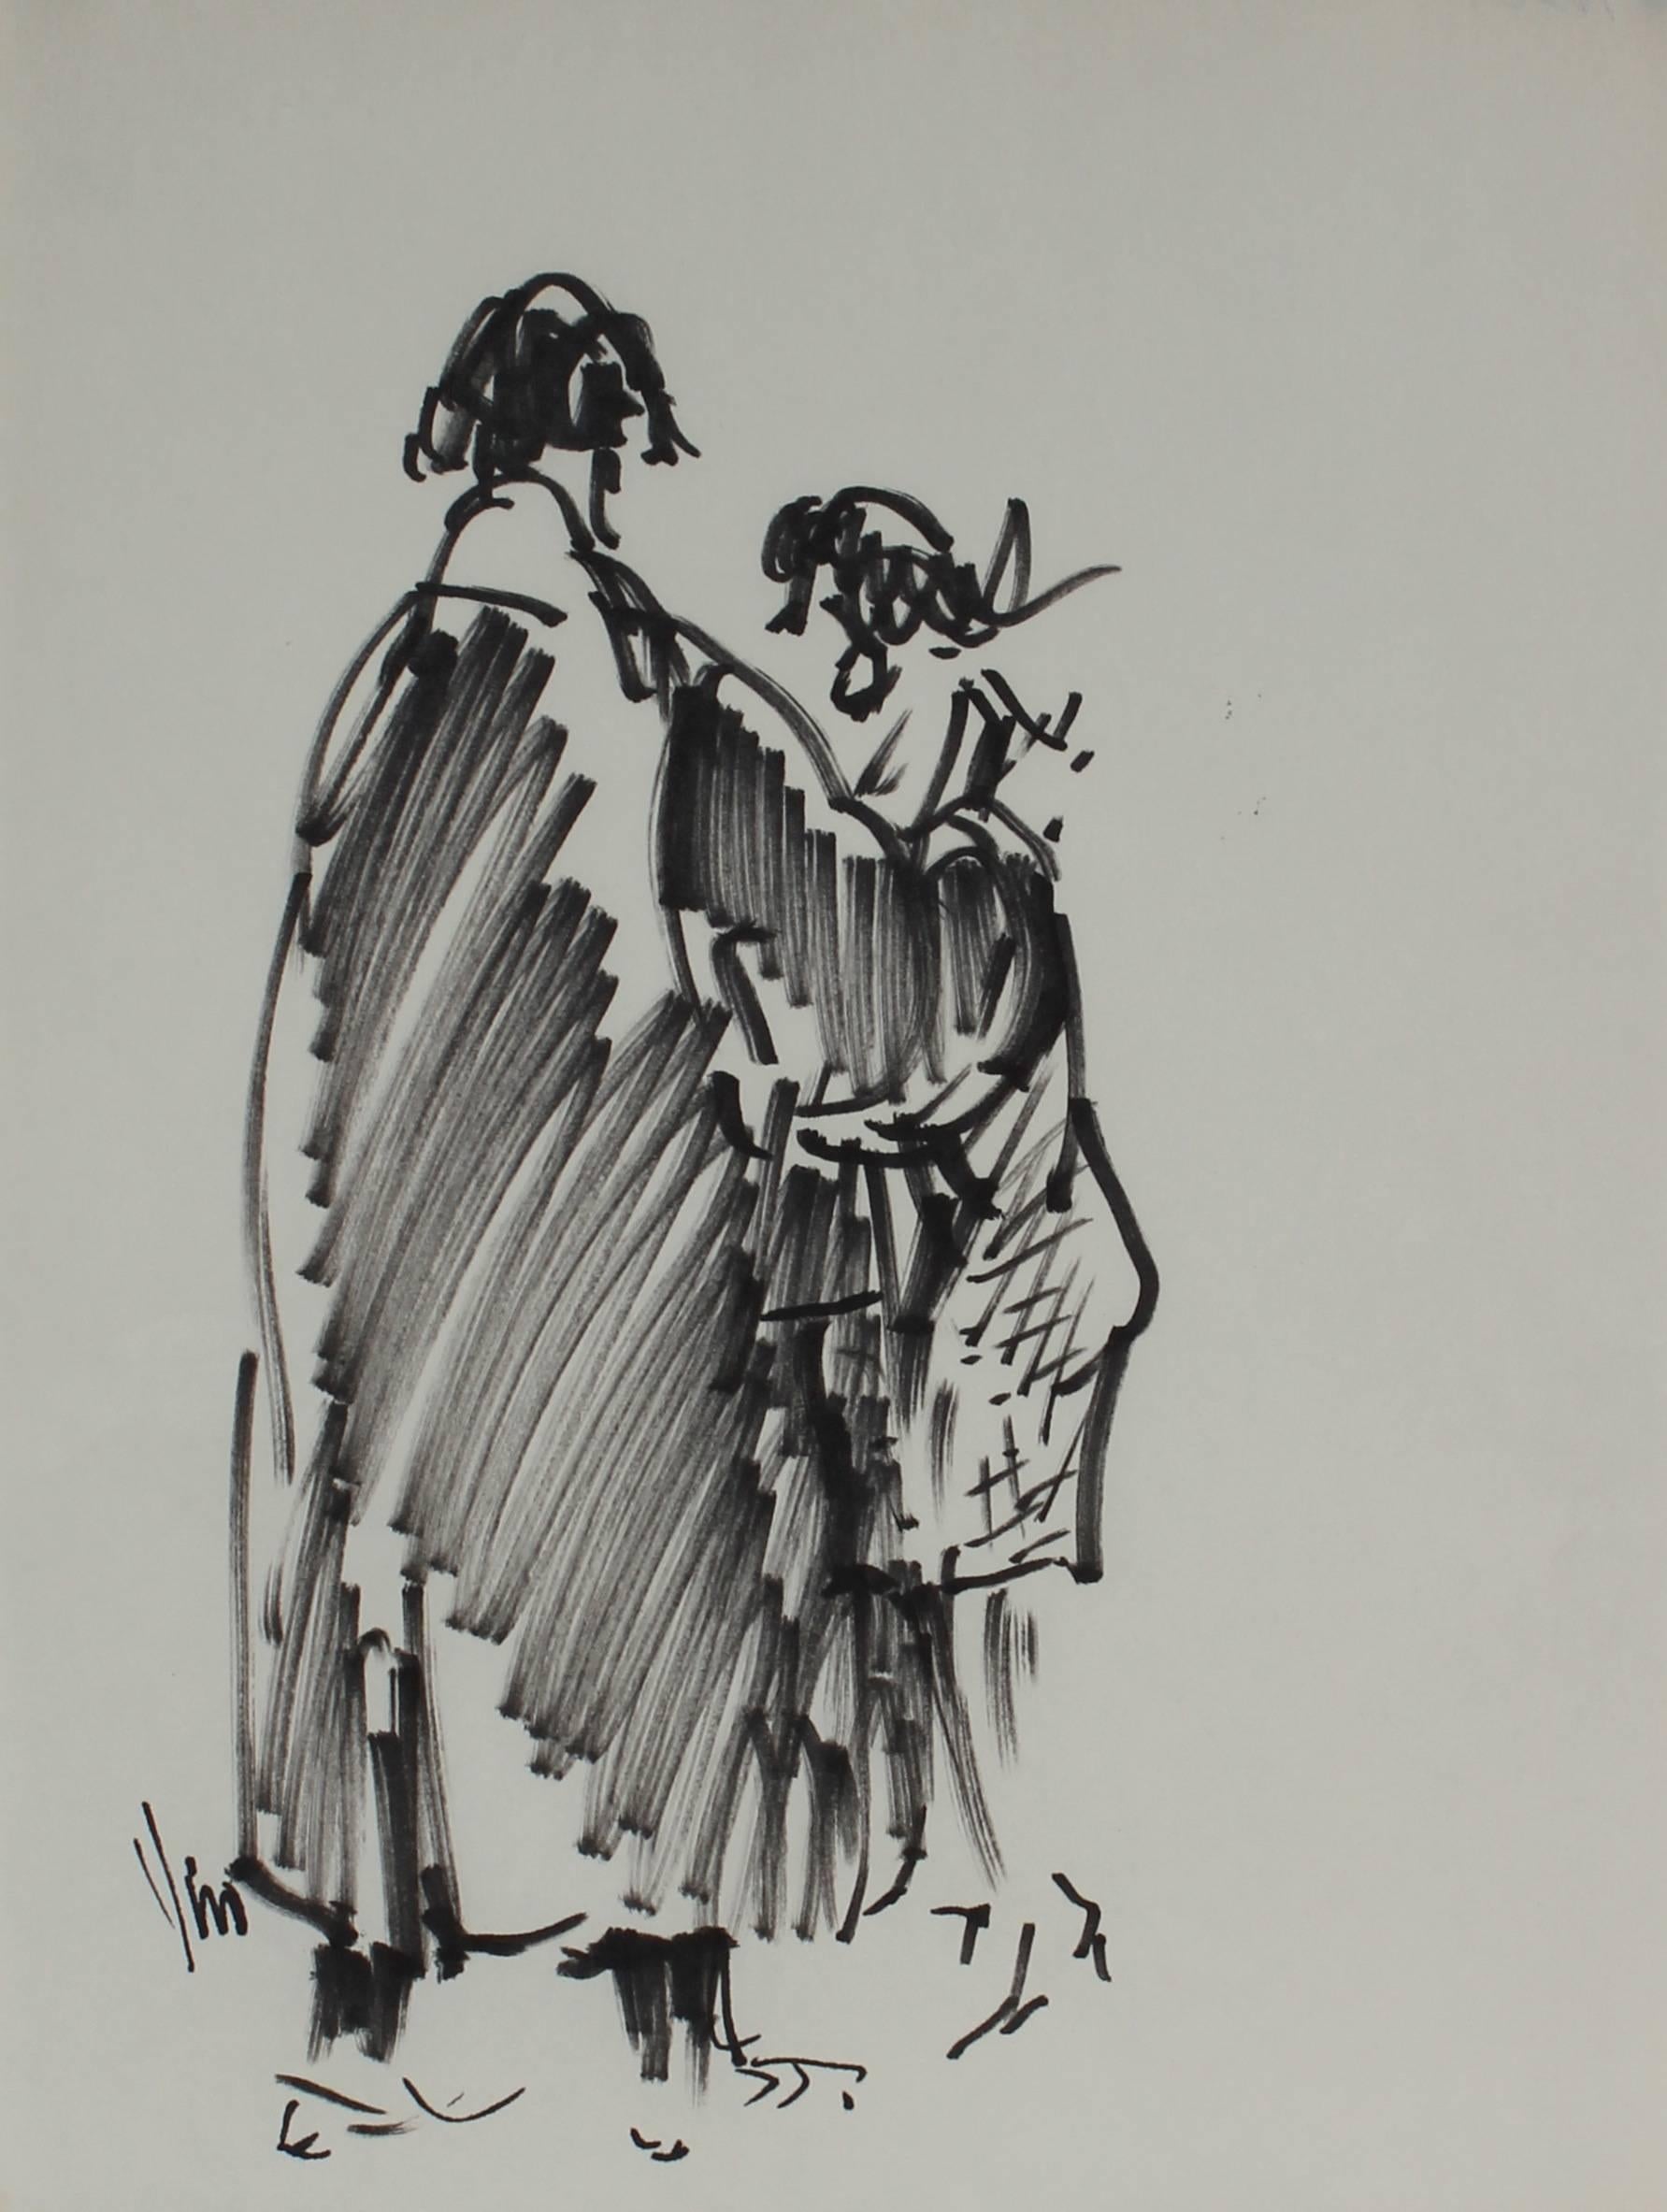 Wiveca Rubinow Figurative Art - Black and White Sketch of Two Figures, Felt Marker on Paper, 1960's